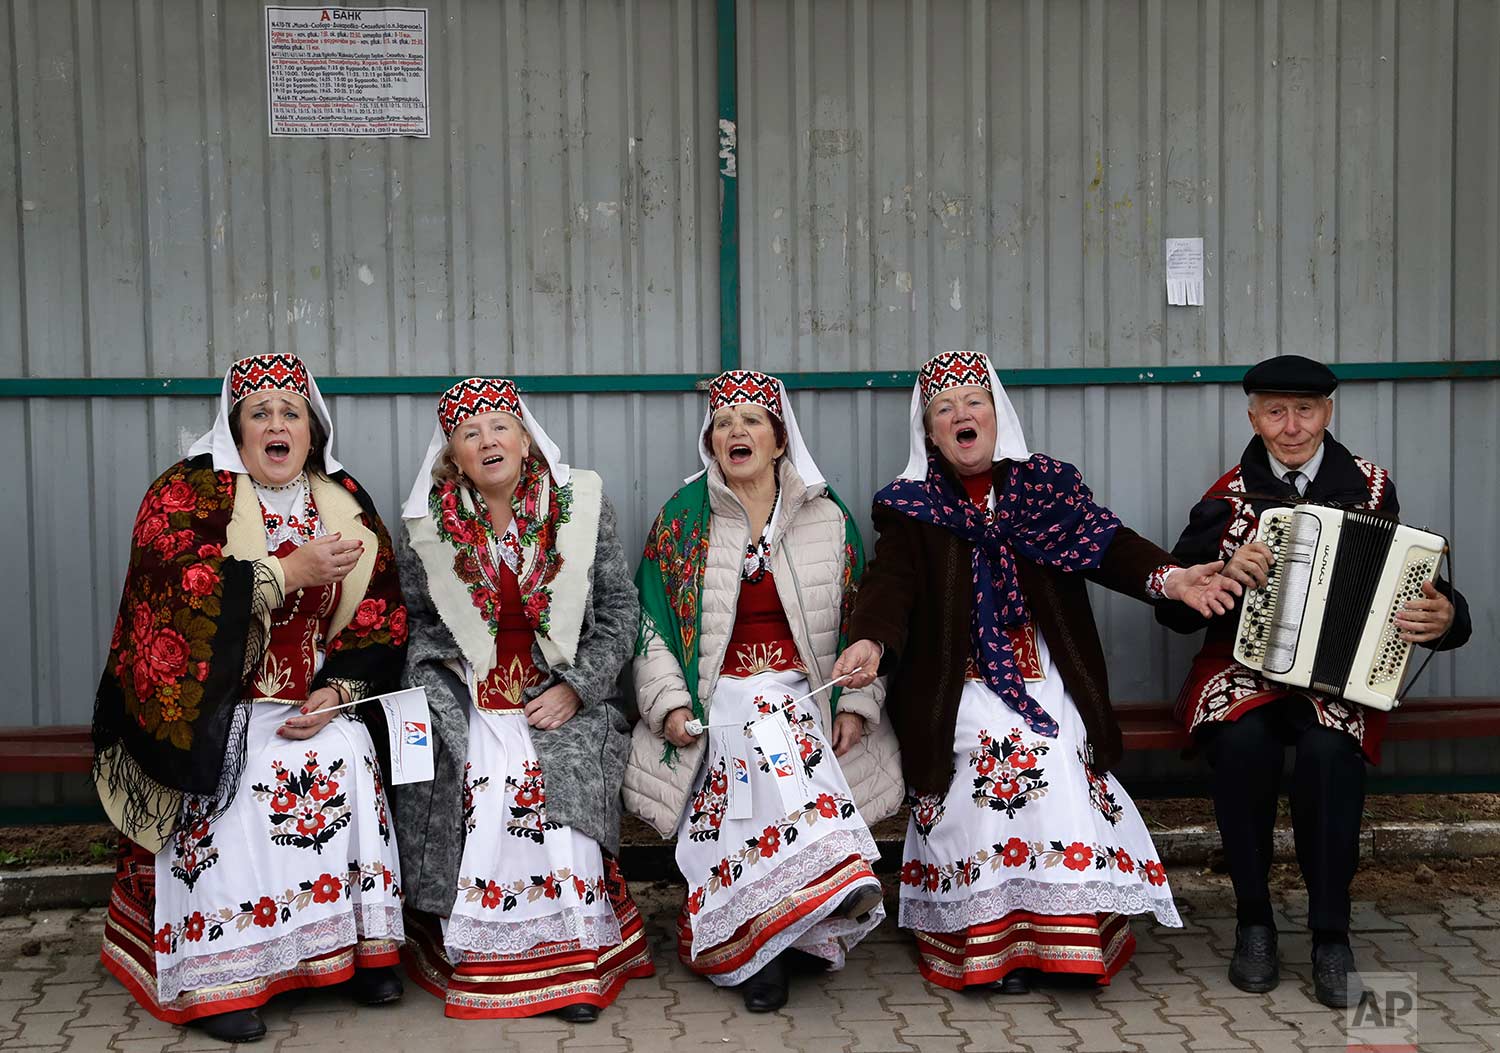  Women wearing Belarusian traditional clothing sing a song as they take part in a national festival marking the end of harvest collection in the town of Smolevichi, Belarus, 30 kilometers (19 miles) east of the capital Minsk, on Saturday, Oct. 7, 201